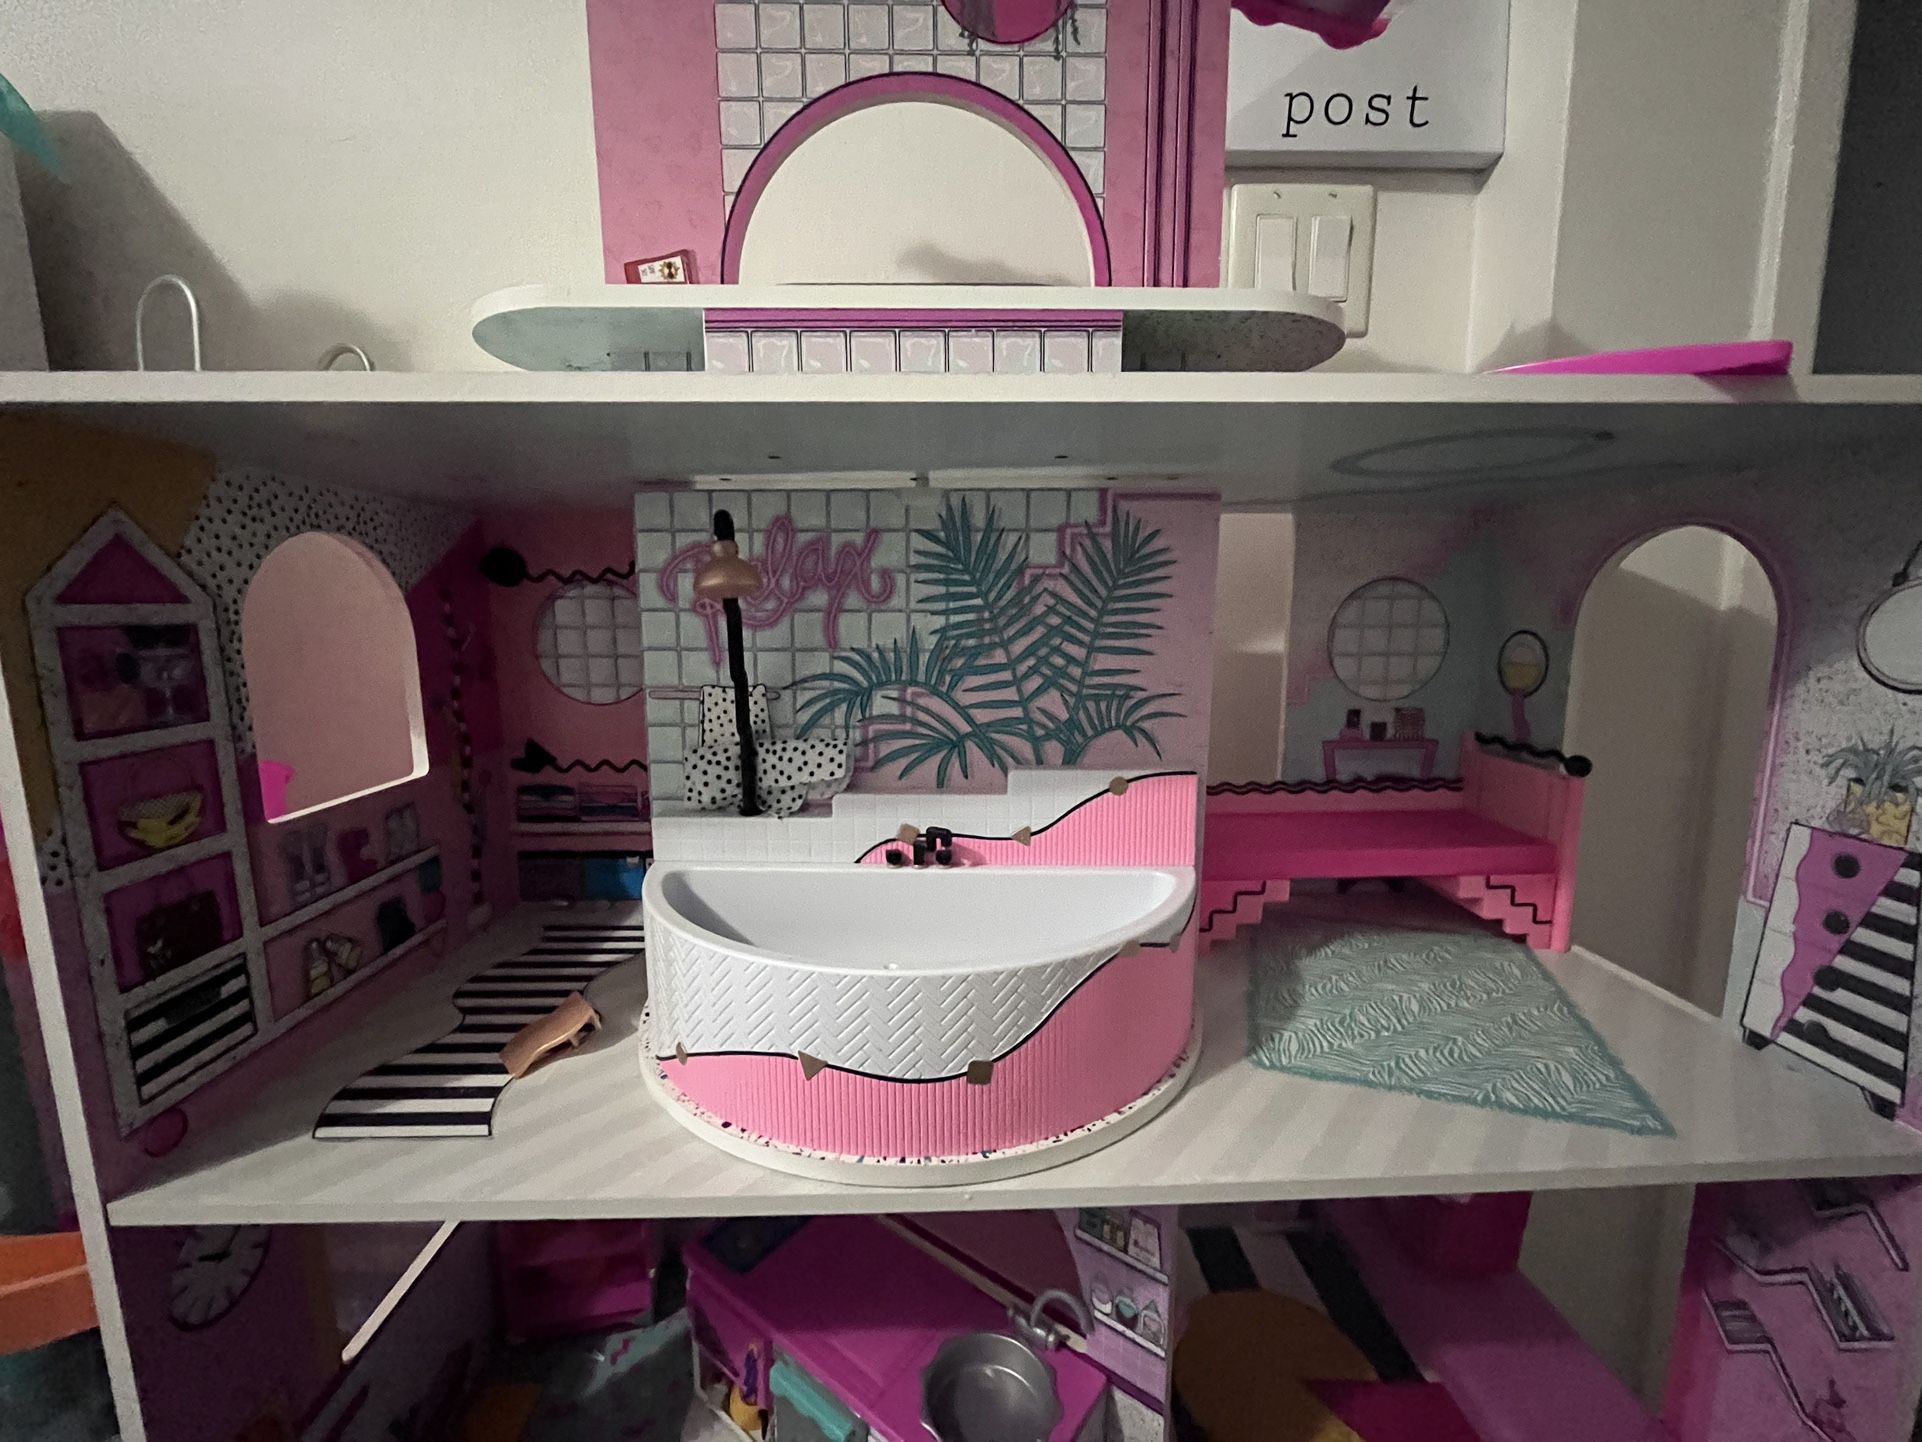 LOL Doll House for Sale in Costa Mesa, CA - OfferUp